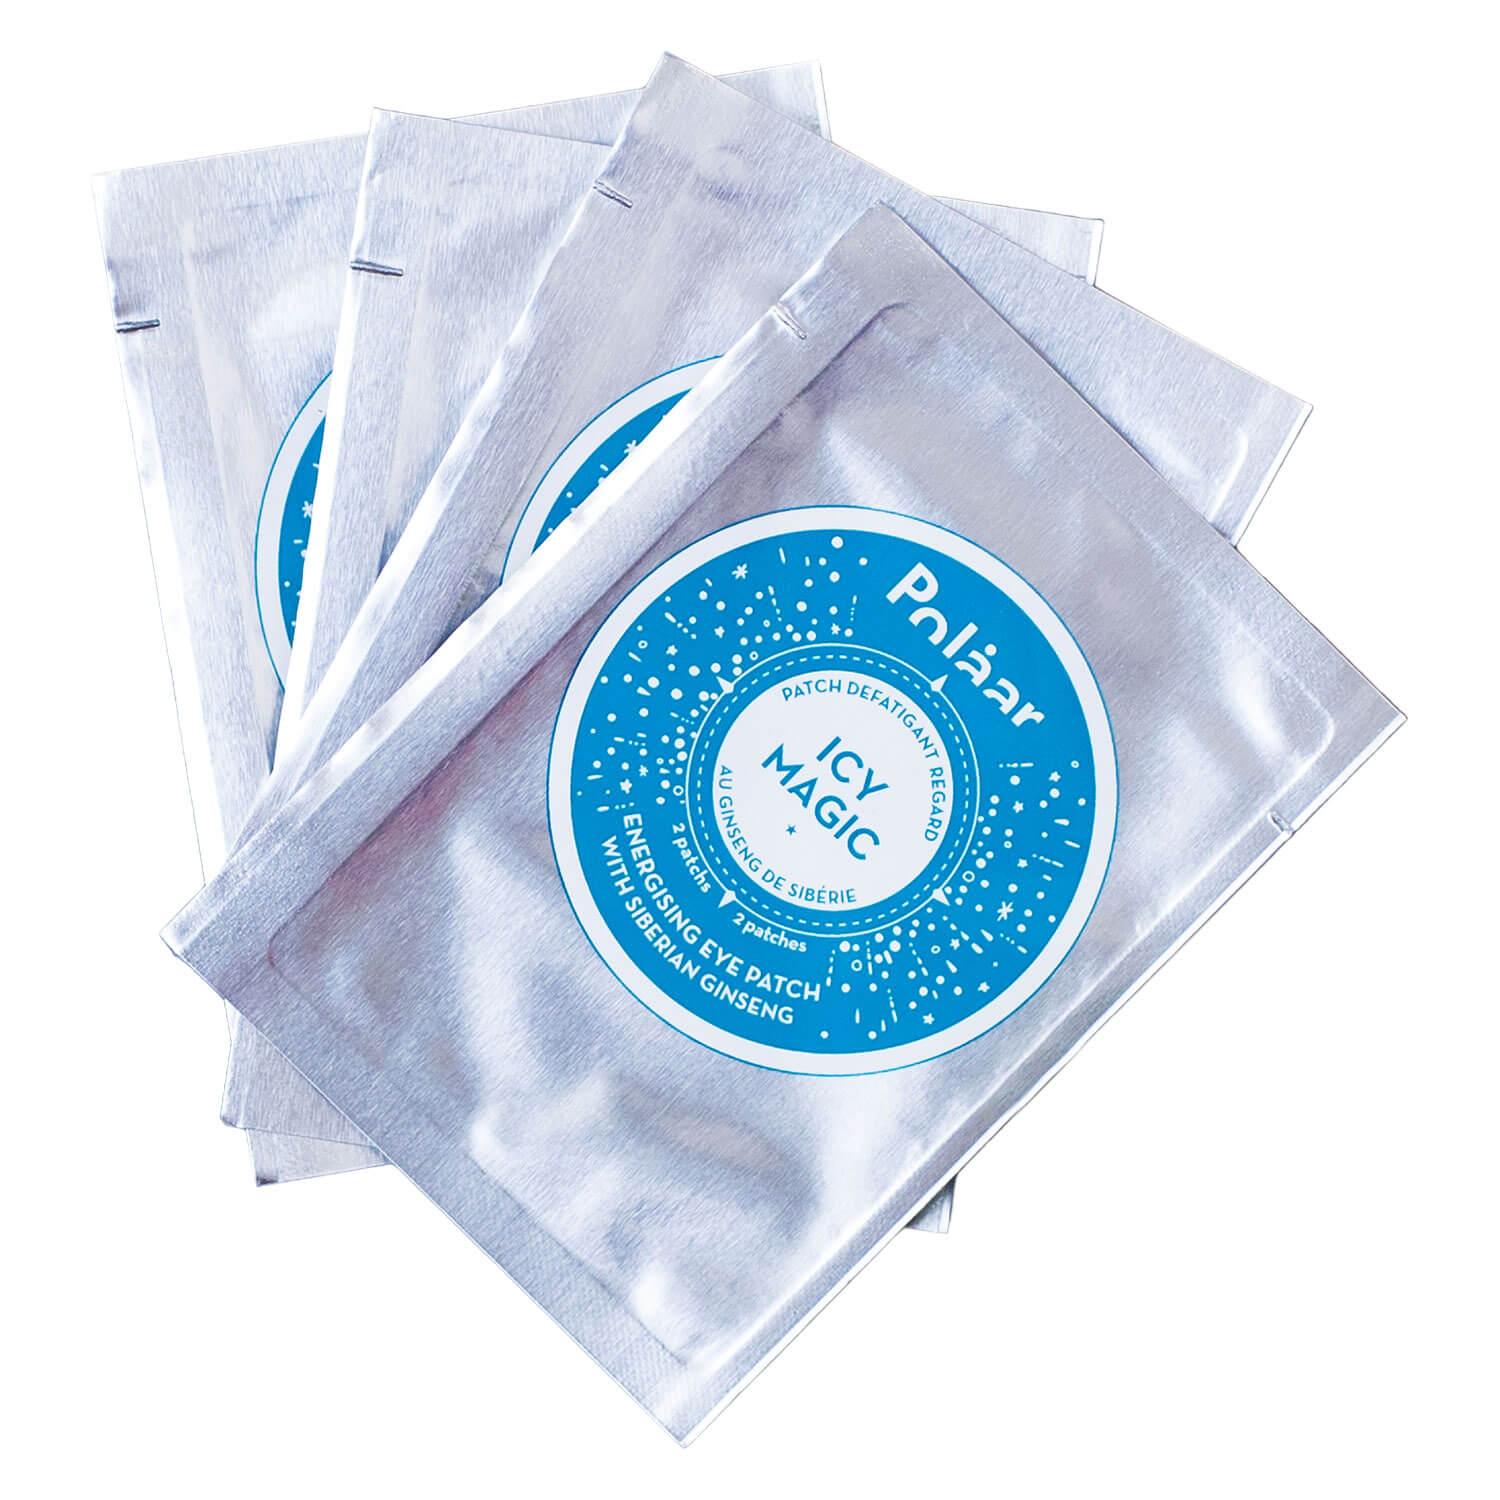 Polaar - Icy Magic Energizing Eye Patch with Siberian Ginseng